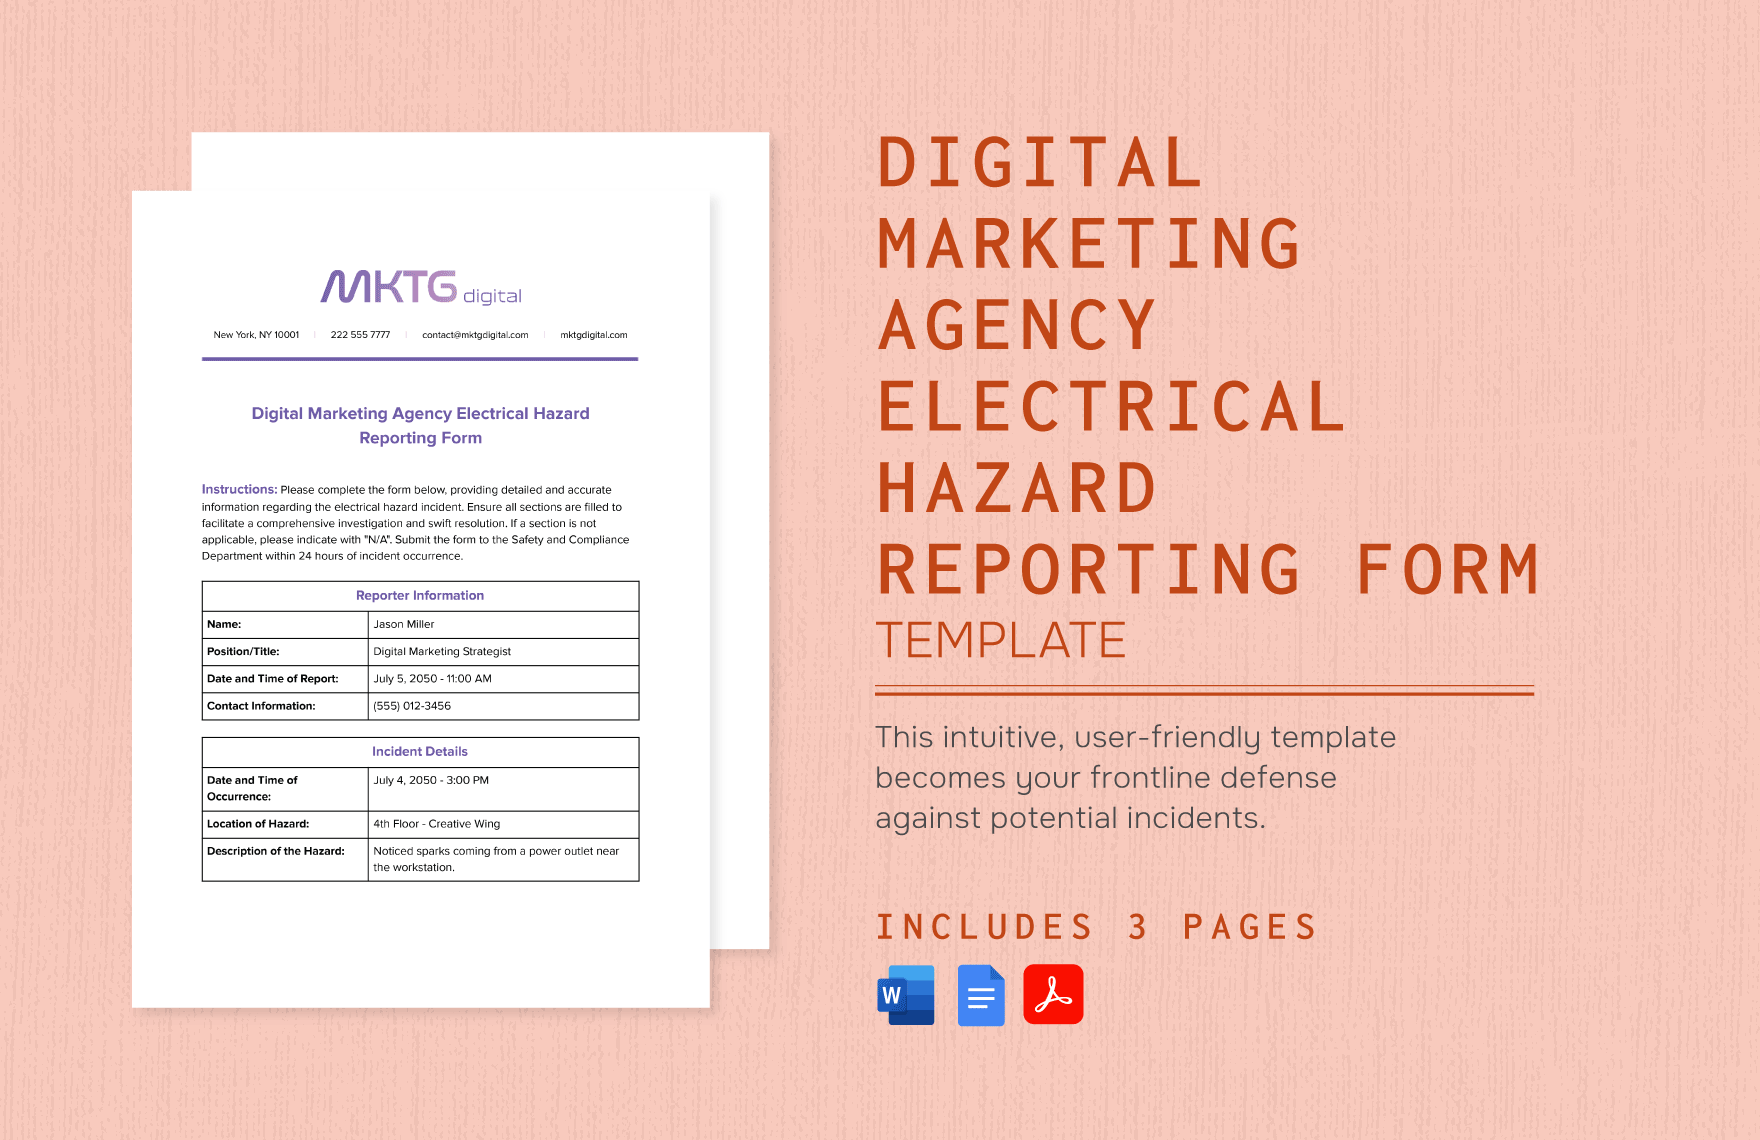 Digital Marketing Agency Electrical Hazard Reporting Form Template